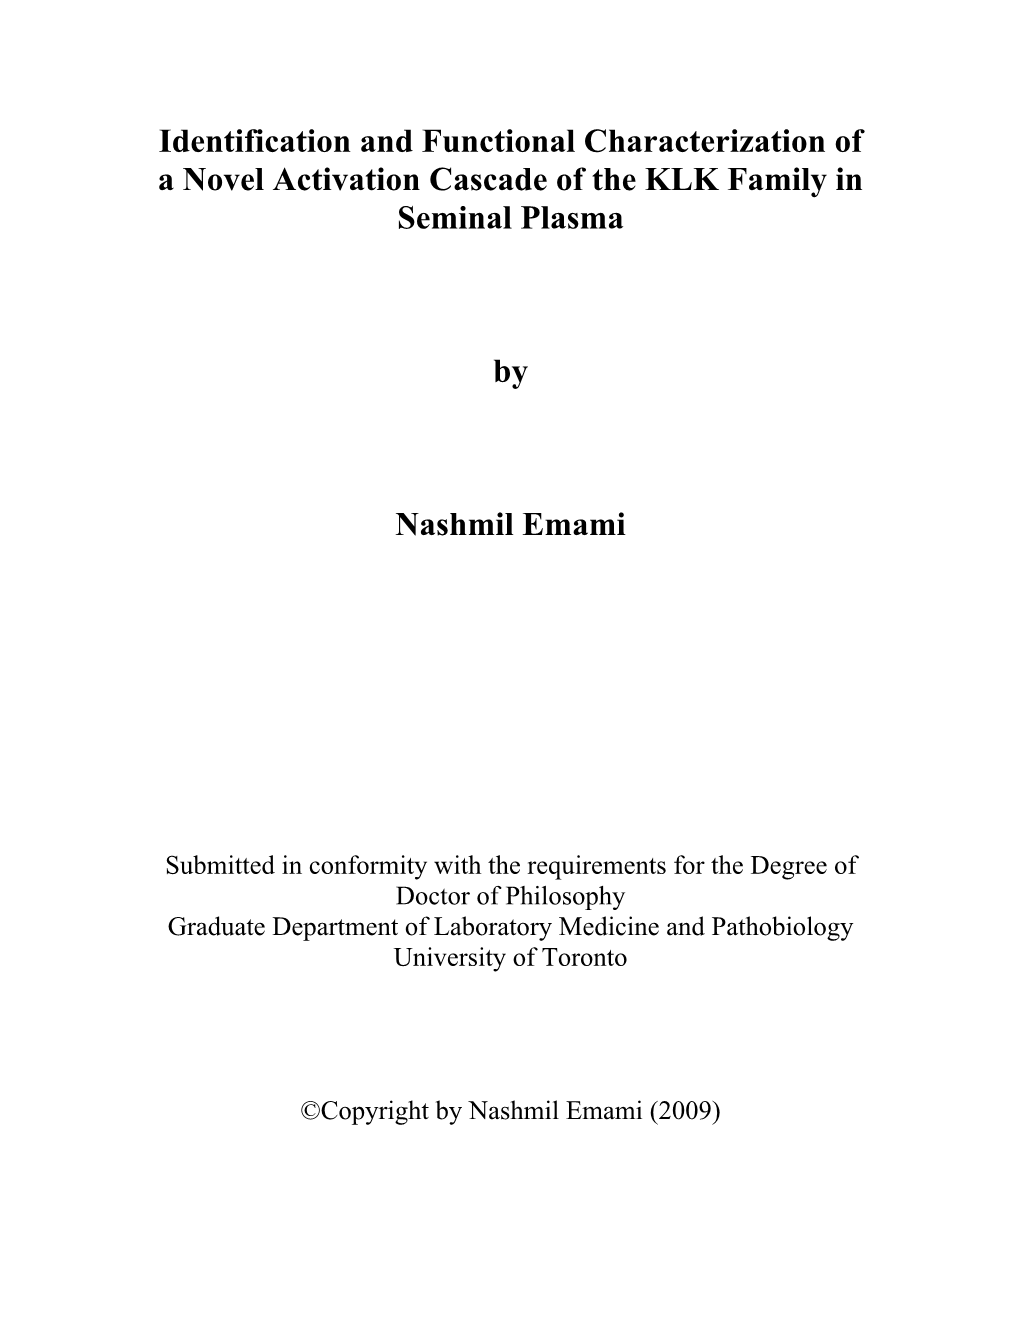 Identification and Functional Characterization of a Novel Activation Cascade of the KLK Family in Seminal Plasma by Nashmil Emam